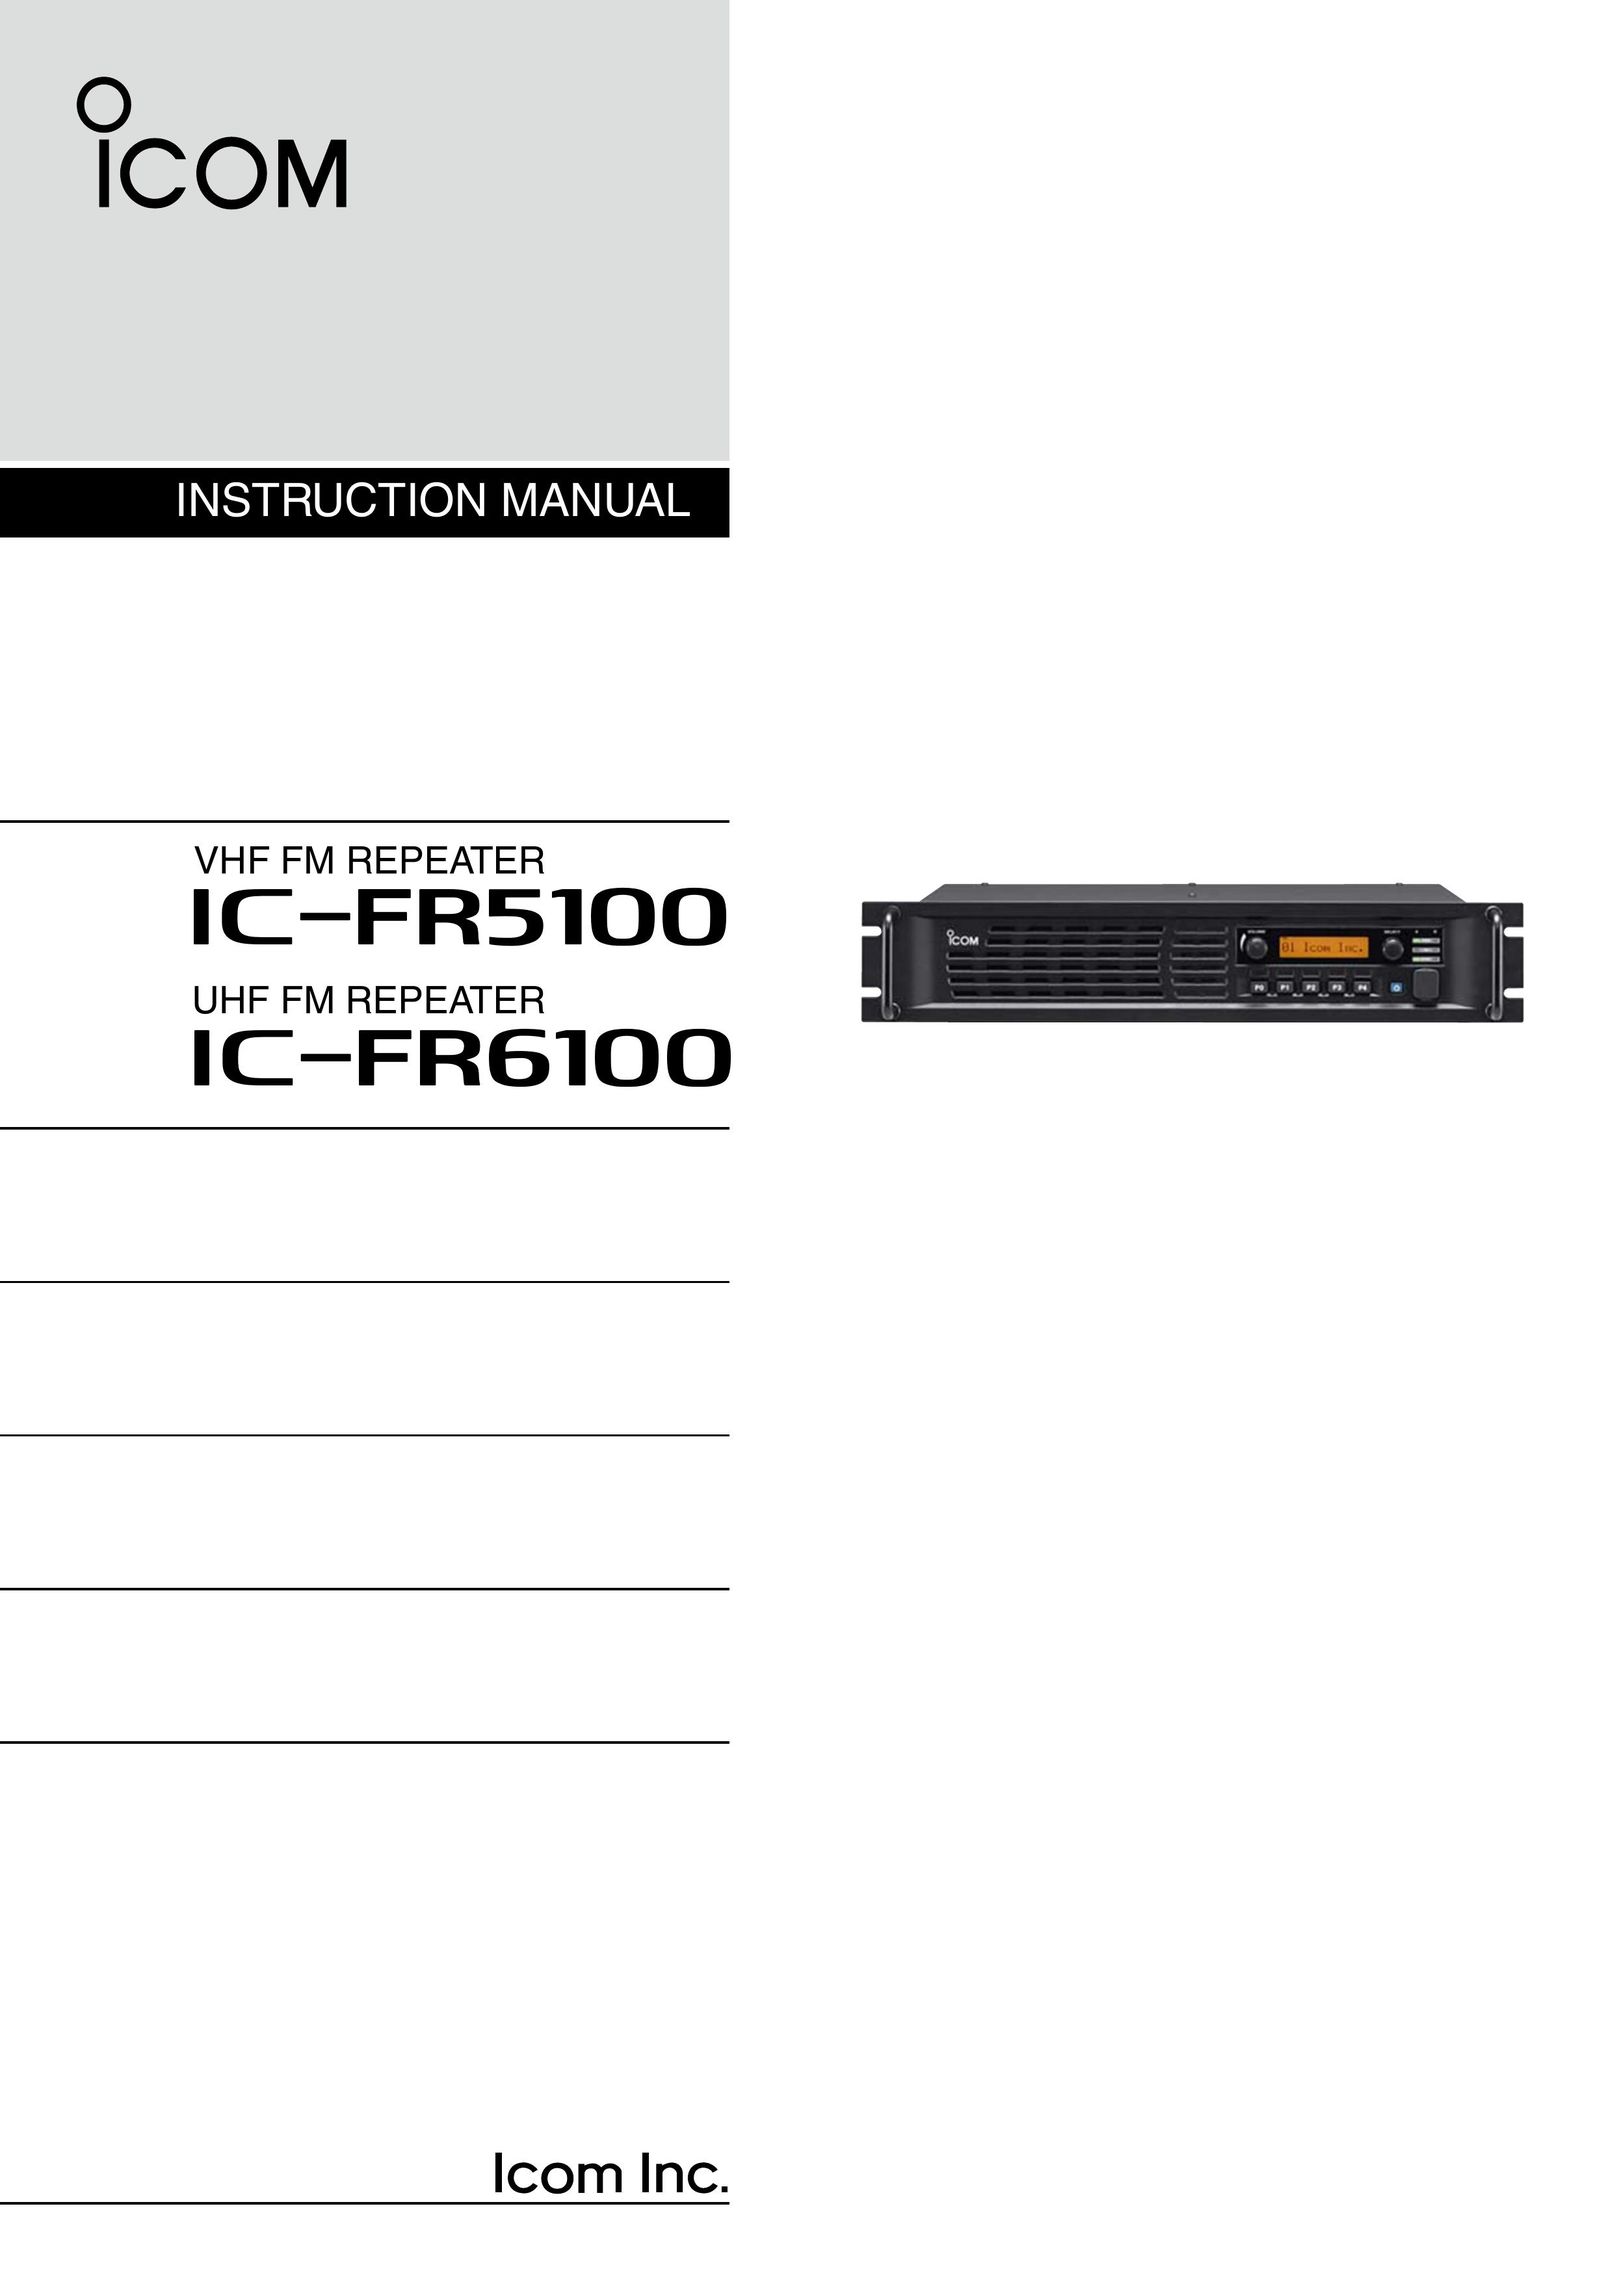 Icom IC-FR5100 Network Router User Manual